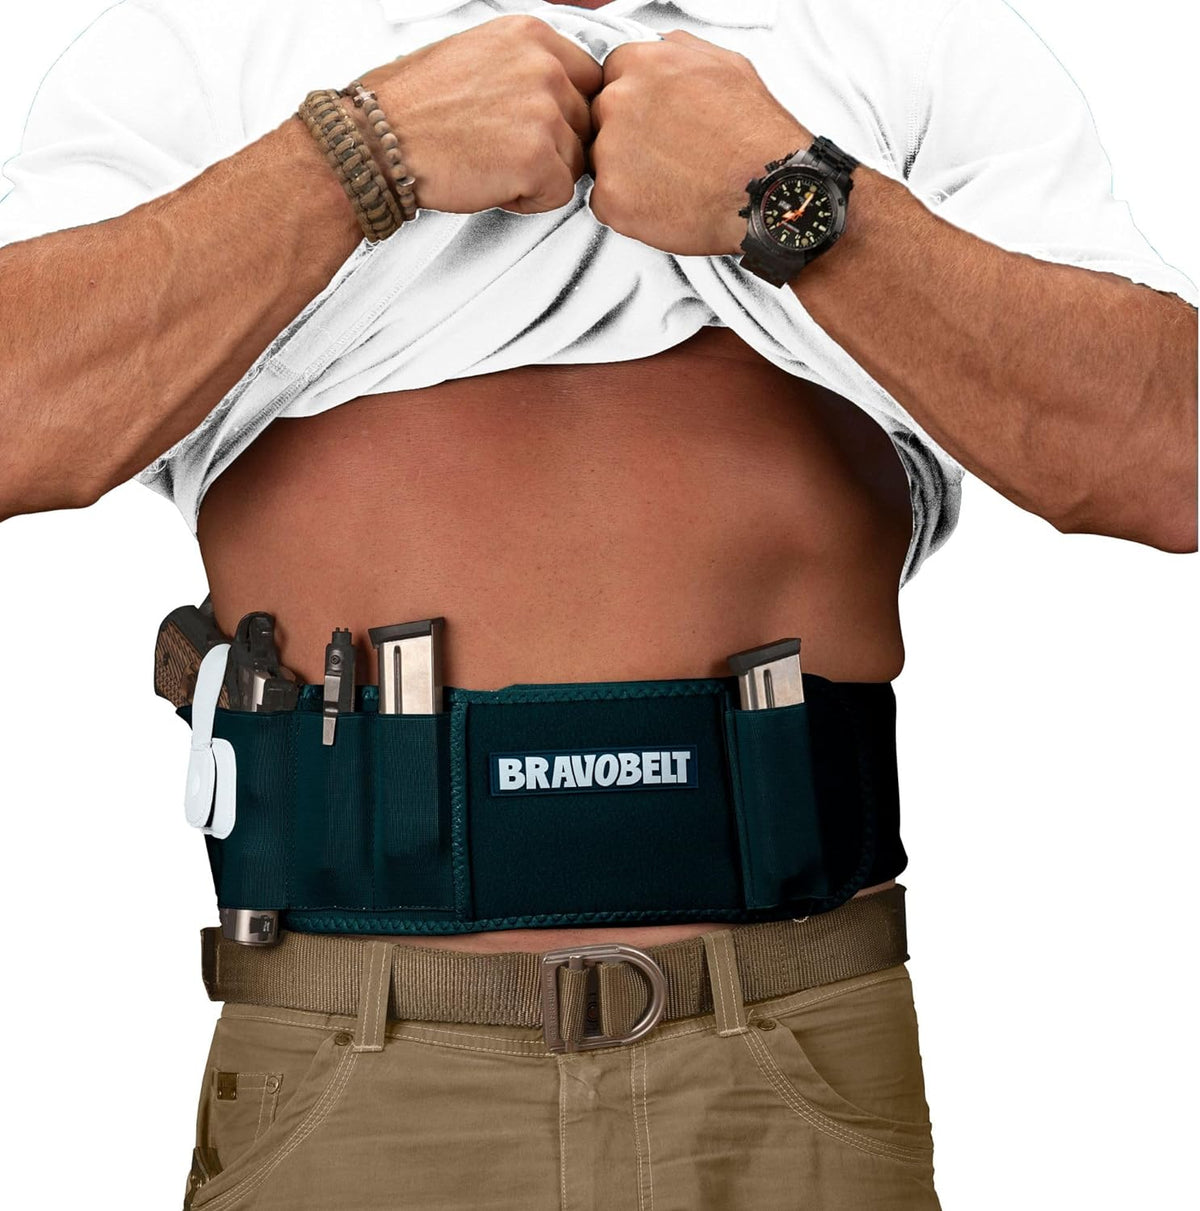 BravoBelt Belly Band Holster for Concealed Carry - Unisex  - Midnight Teal